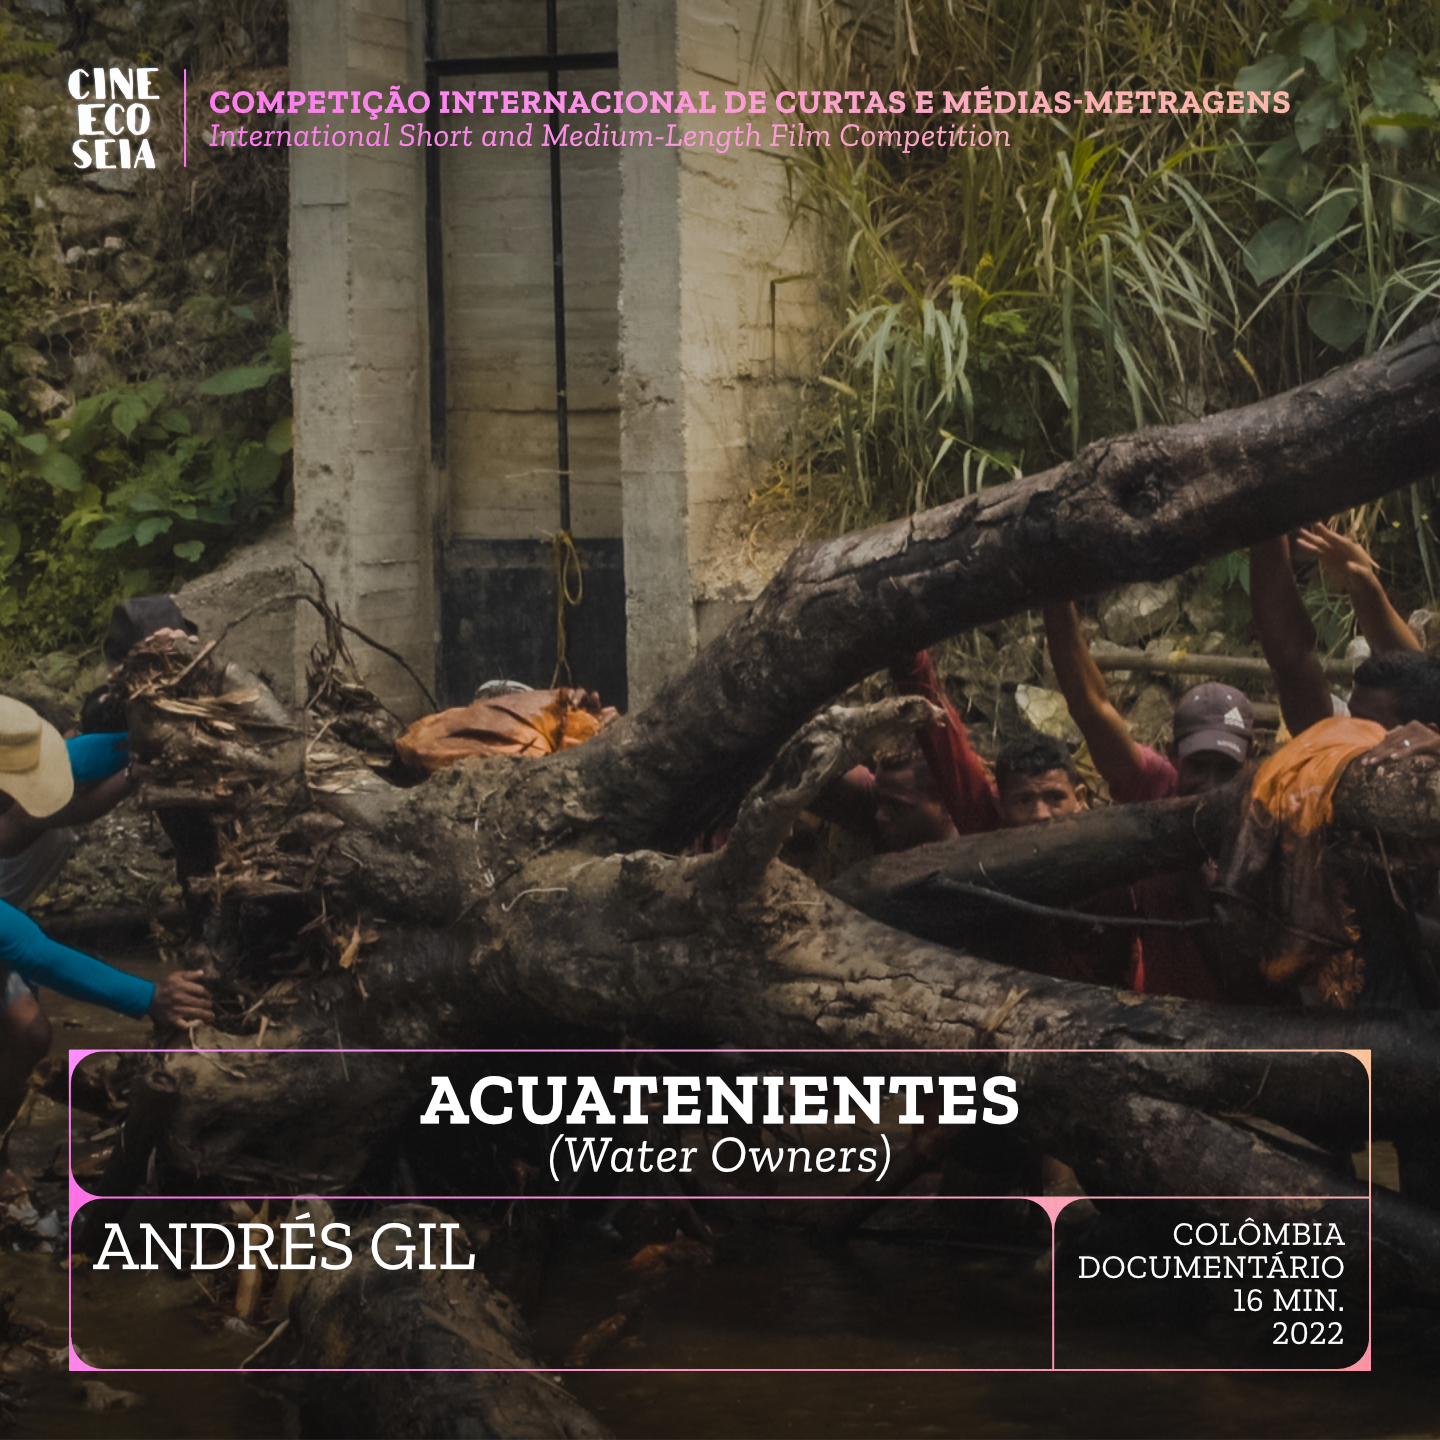 Acuatenientes (Water Owners)